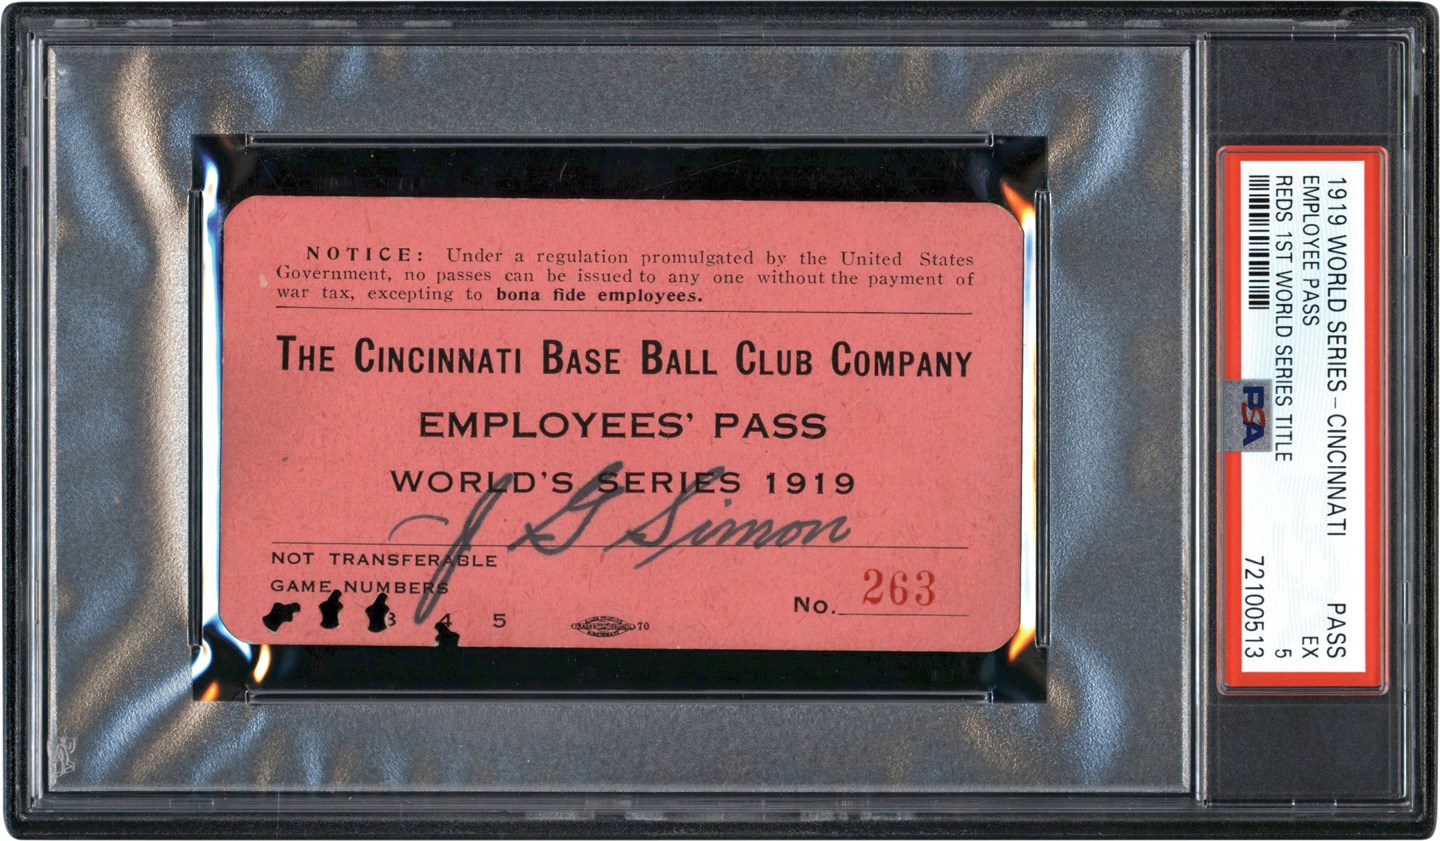 - 1919 World Series Cincinnati Reds Employees Pass PSA EX 5 (1 of 1 Only Known Example)